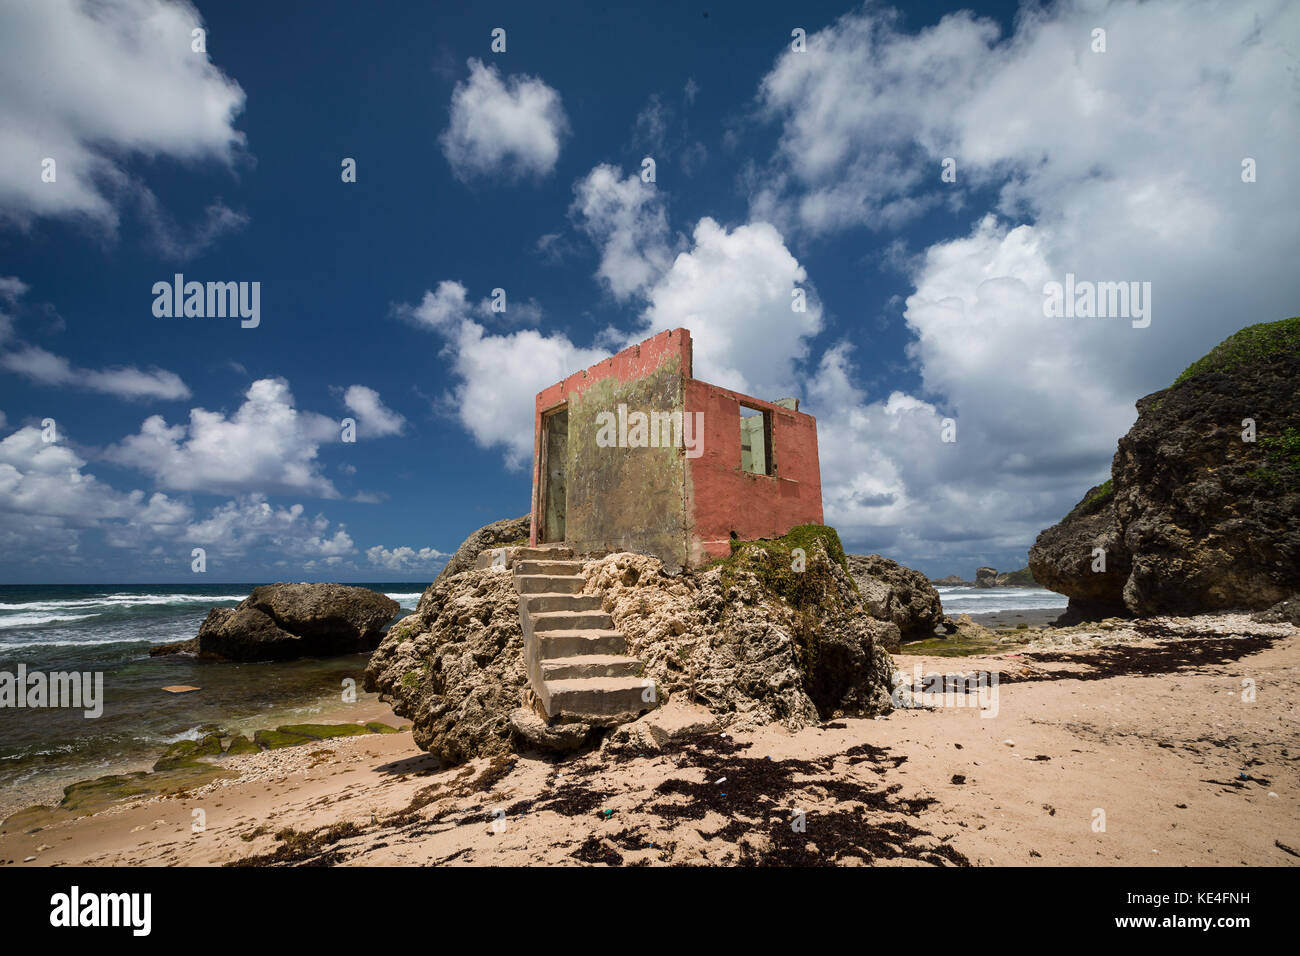 The ruin of an old changing room stands on the rocks at Bathsheba. Caribbean island of Barbados. Stock Photo